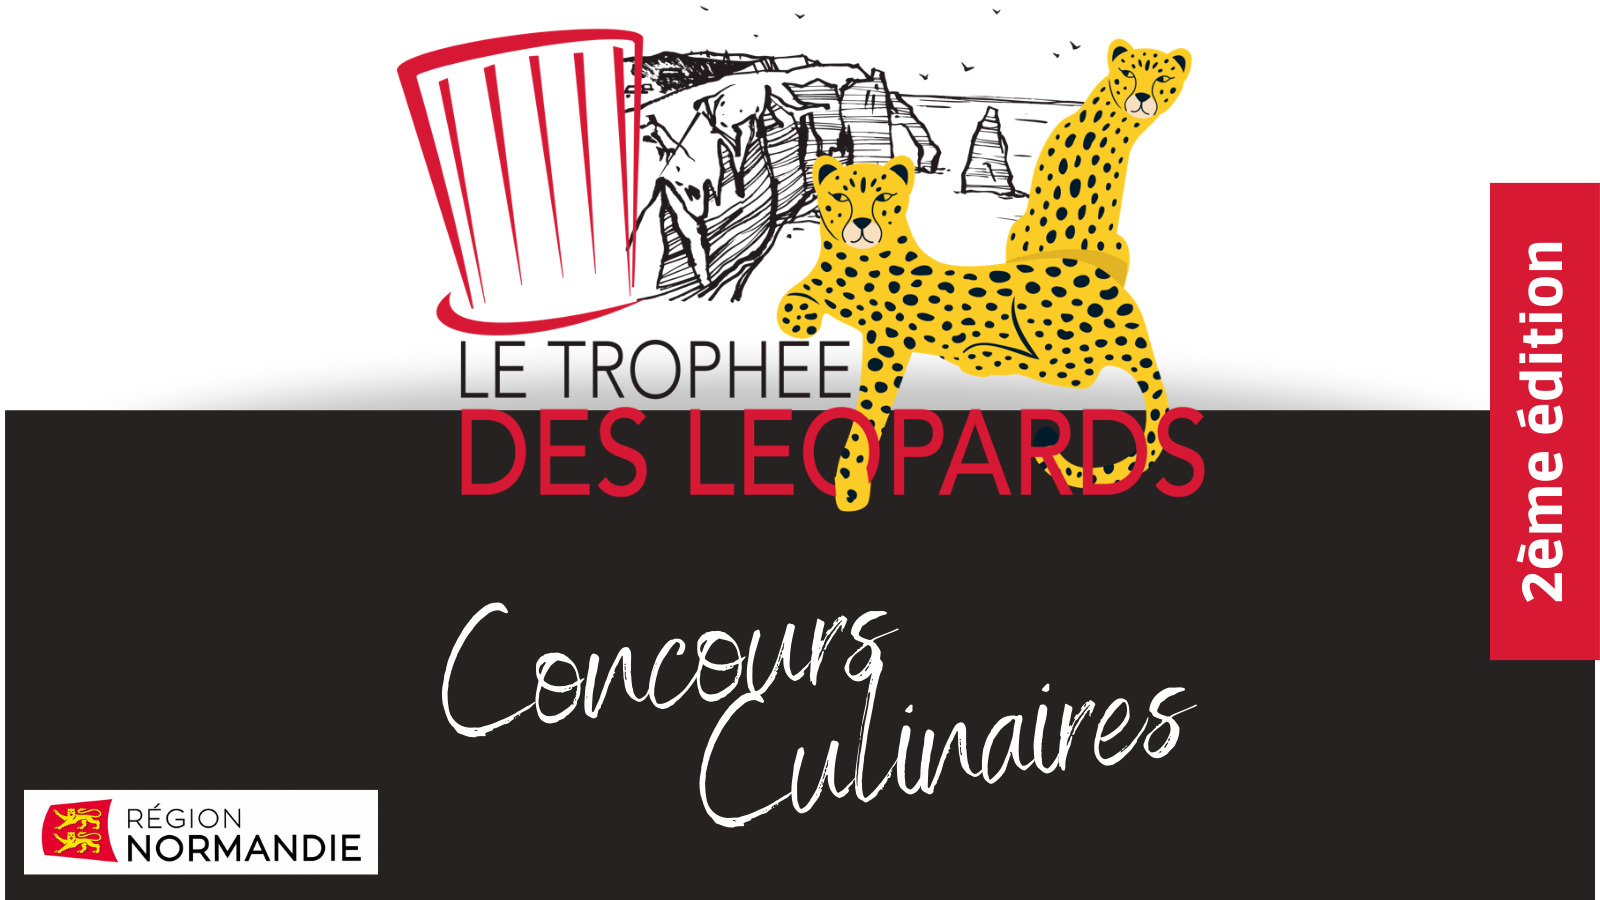 Normandy culinary competition: The Leopards Trophy!